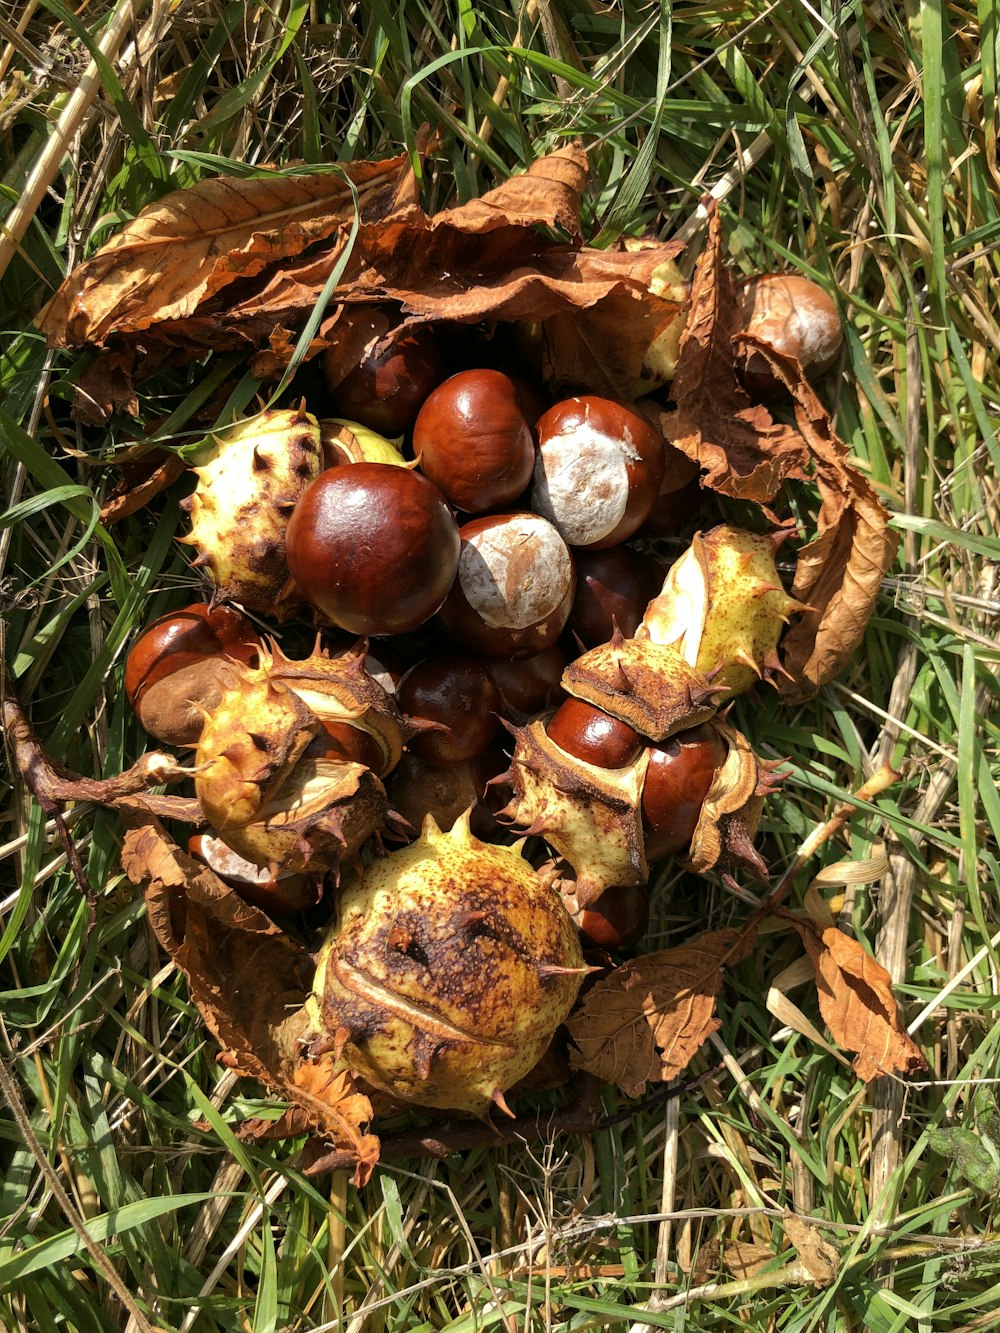 chestnuts and leaves on the ground in the grass